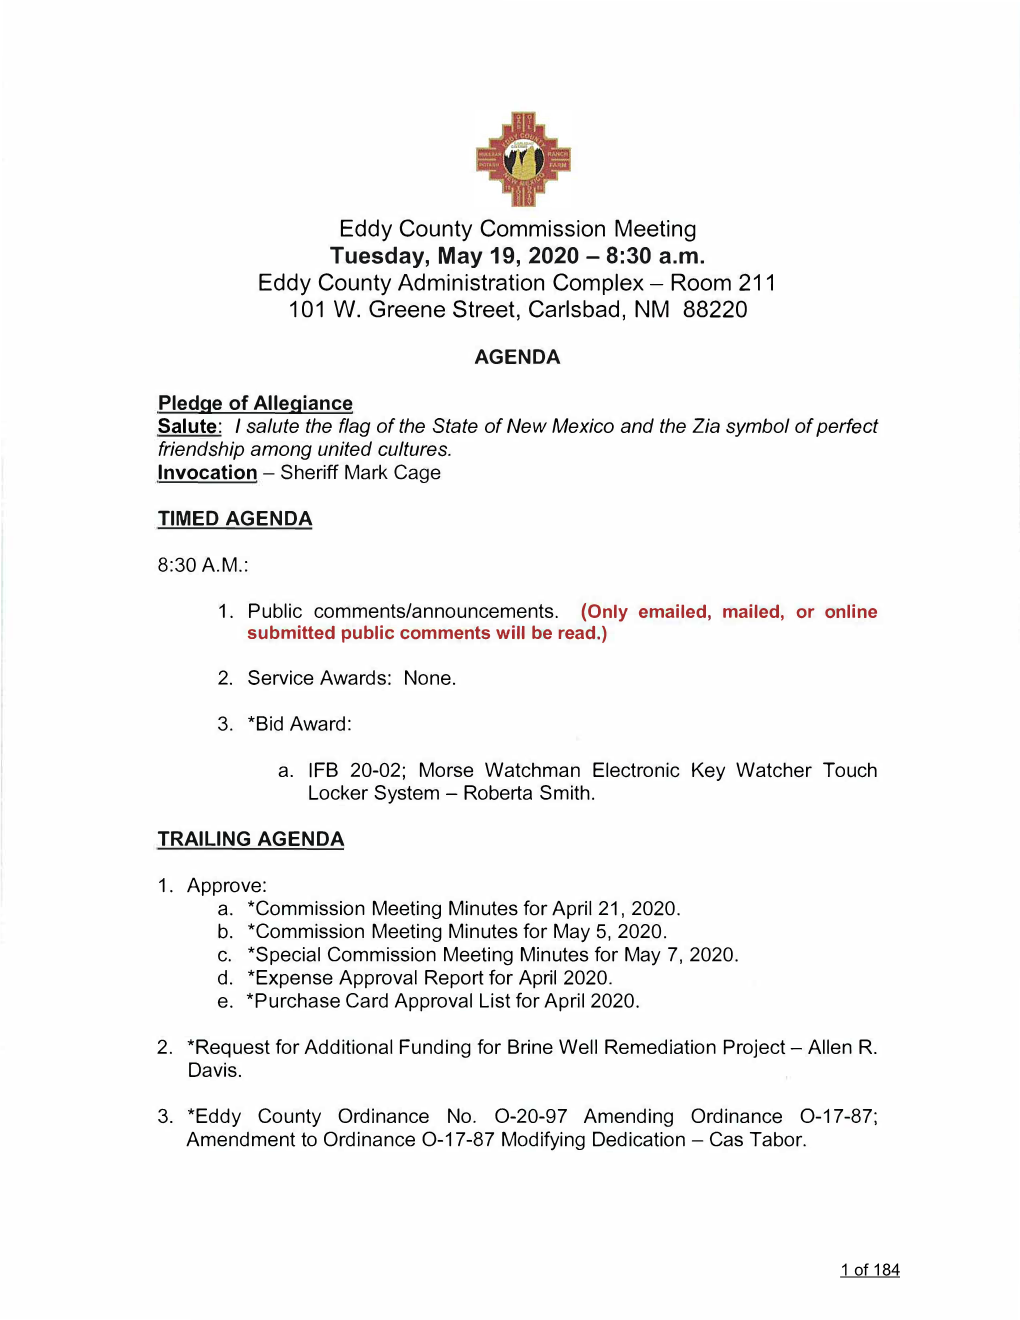 Eddy County Commission Meeting Tuesday, May 19, 2020 - 8:30 A.M